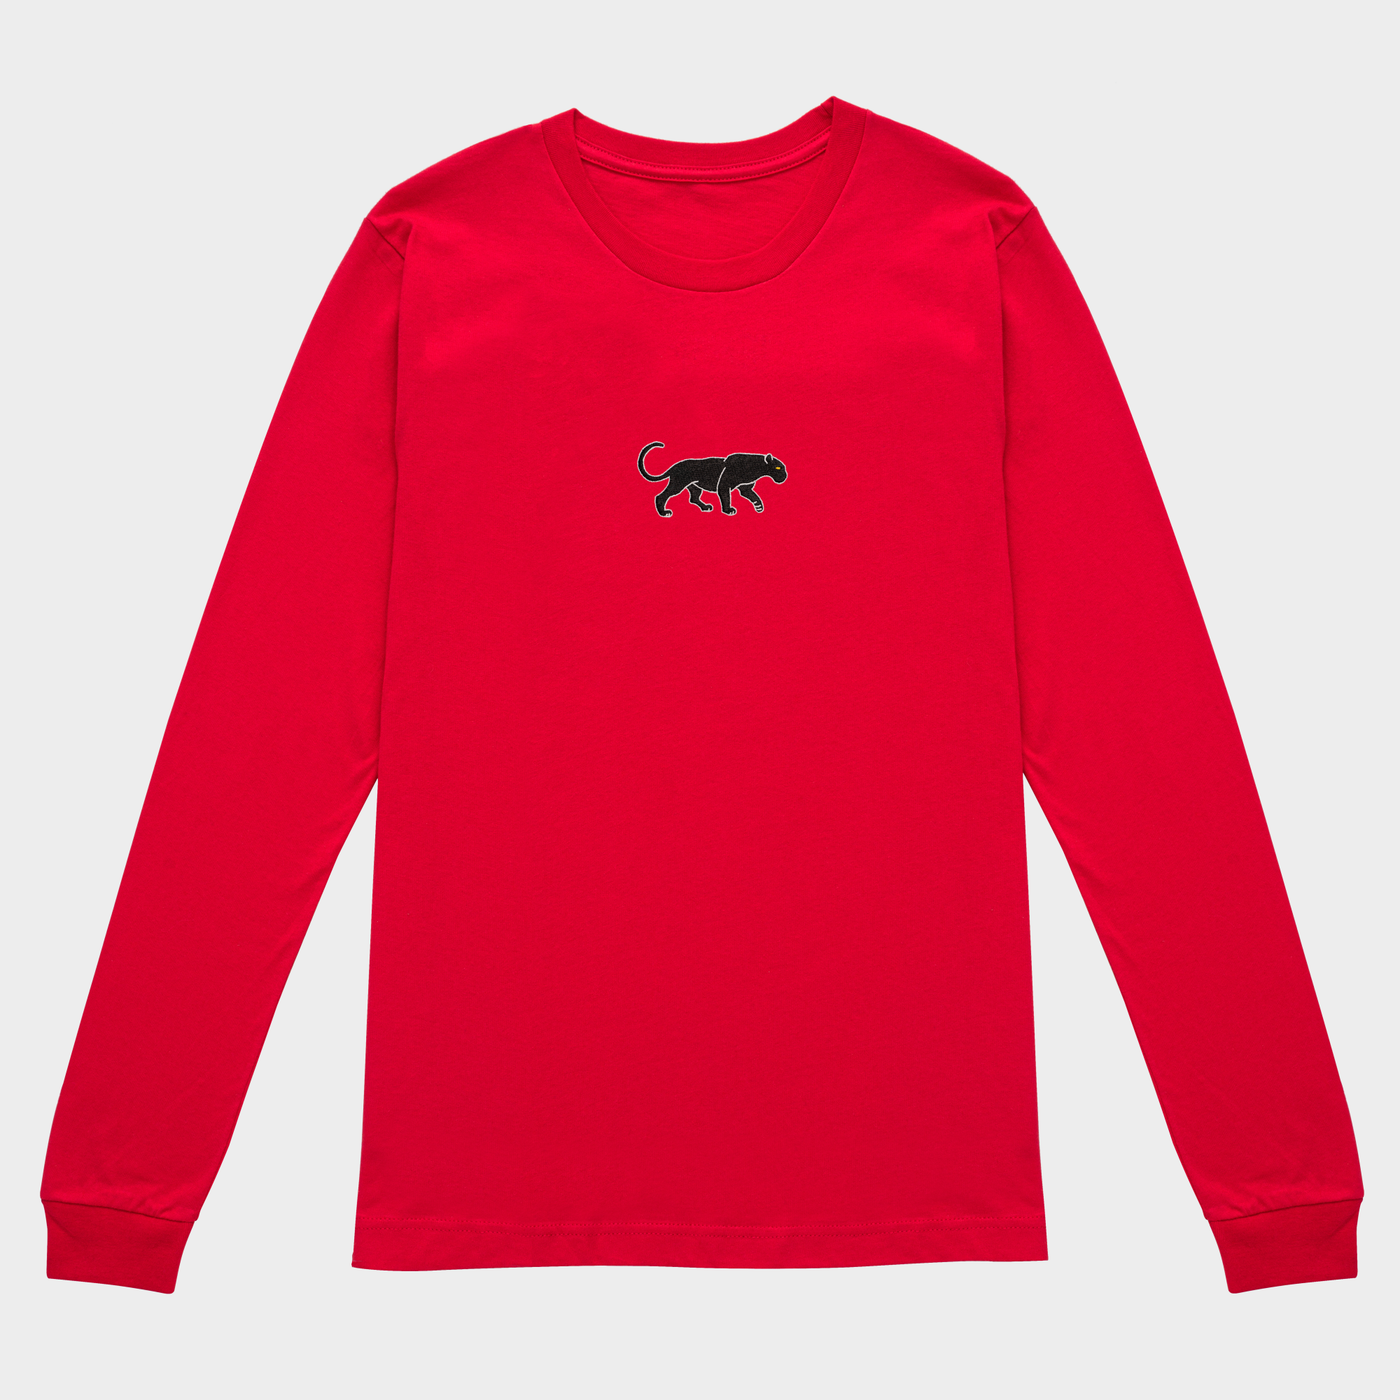 Bobby's Planet Women's Embroidered Black Jaguar Long Sleeve Shirt from South American Amazon Animals Collection in Red Color#color_red